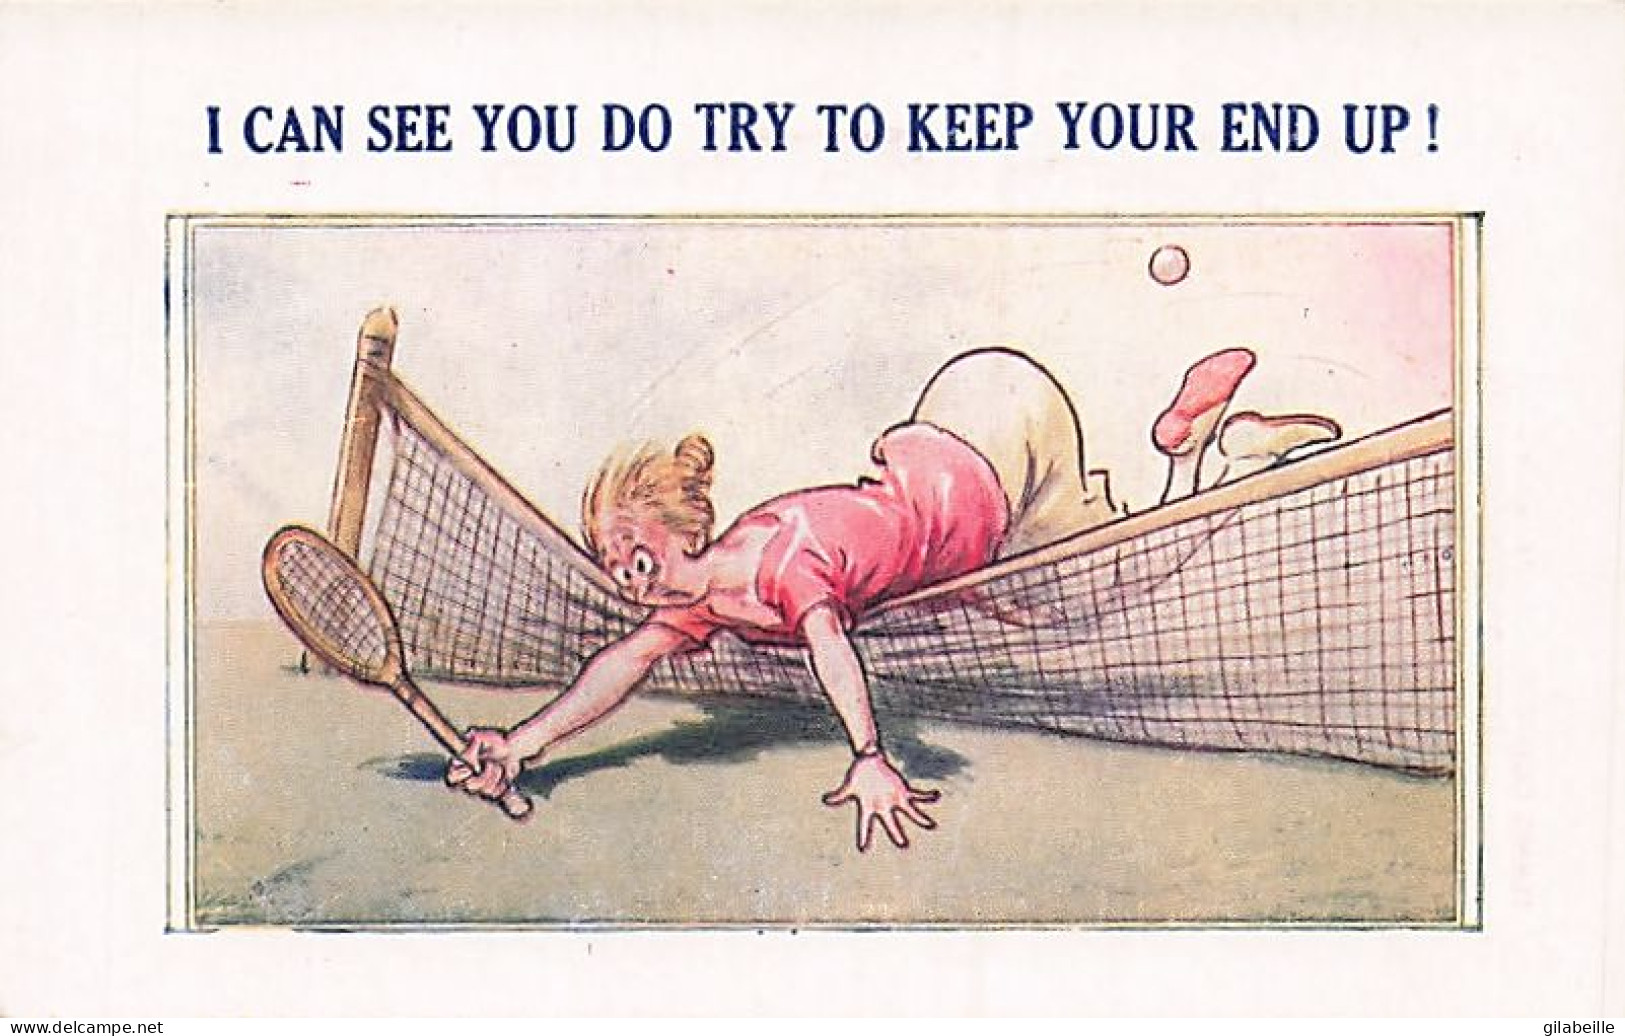 Sport - TENNIS - Humor - Humour - I Can See You Do Try Keep Your End Up !! - Tennis